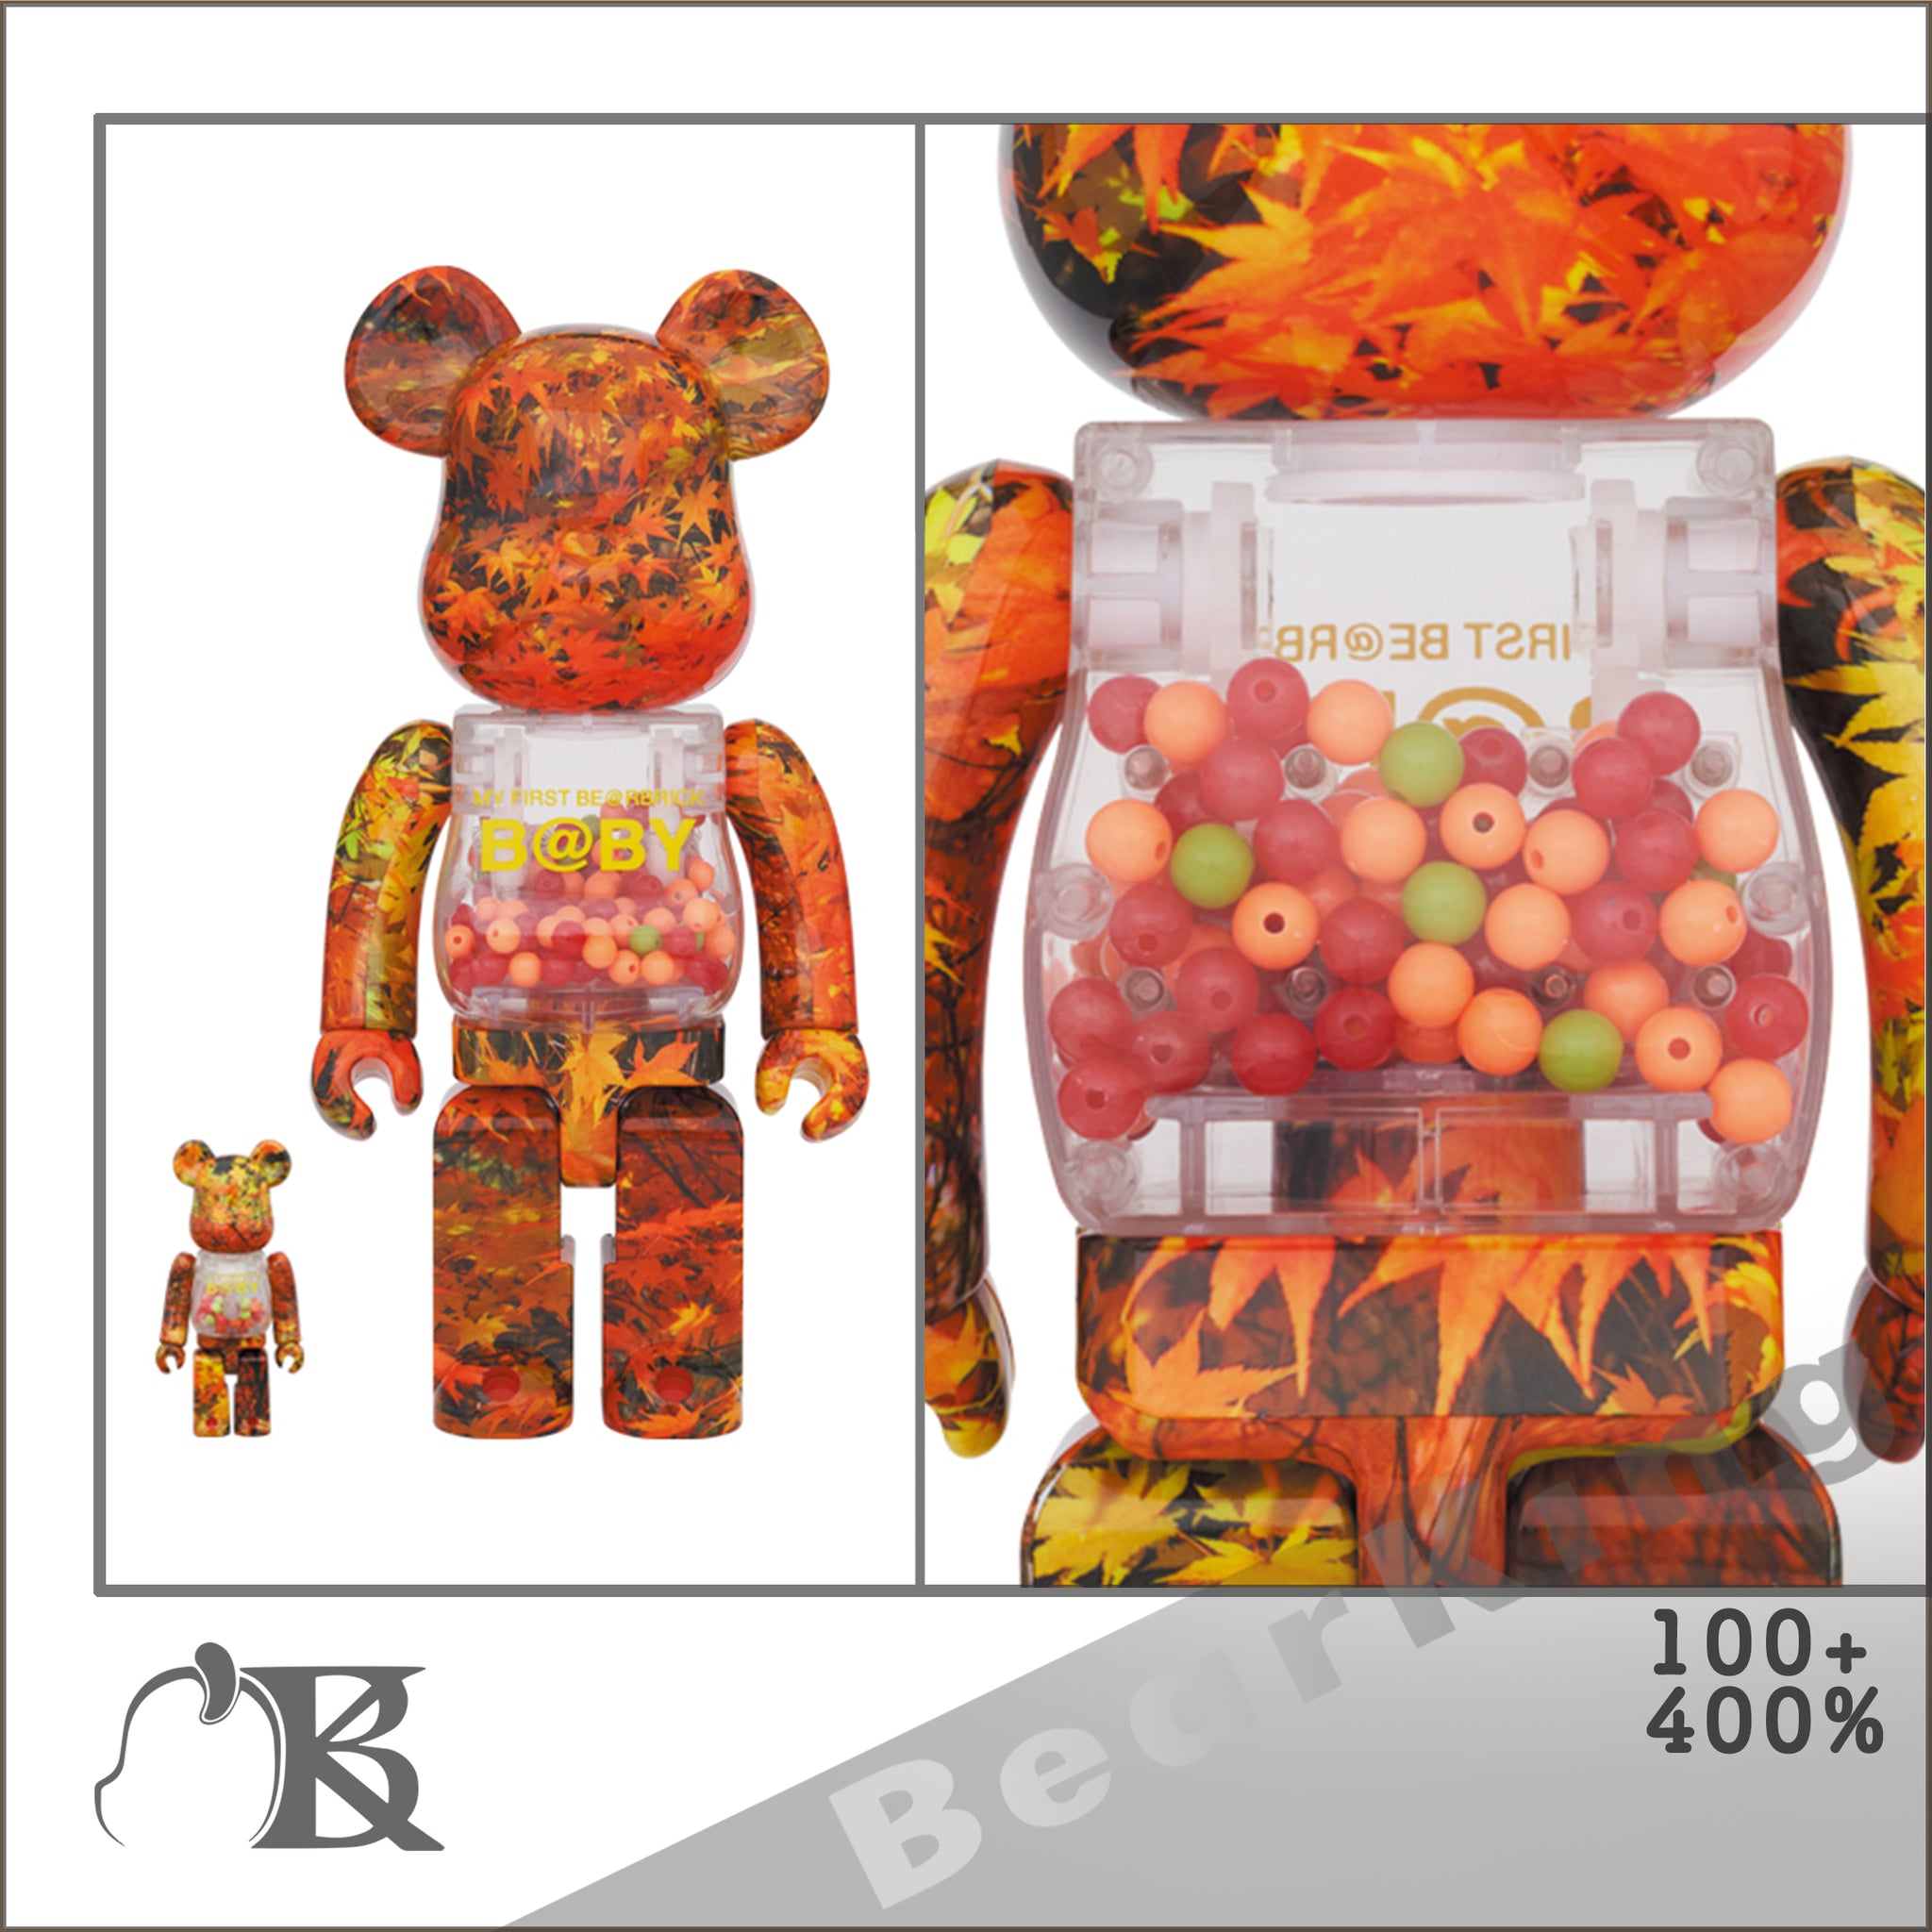 MY FIRST BE@RBRICK B@BY AUTUMN LEAVESver